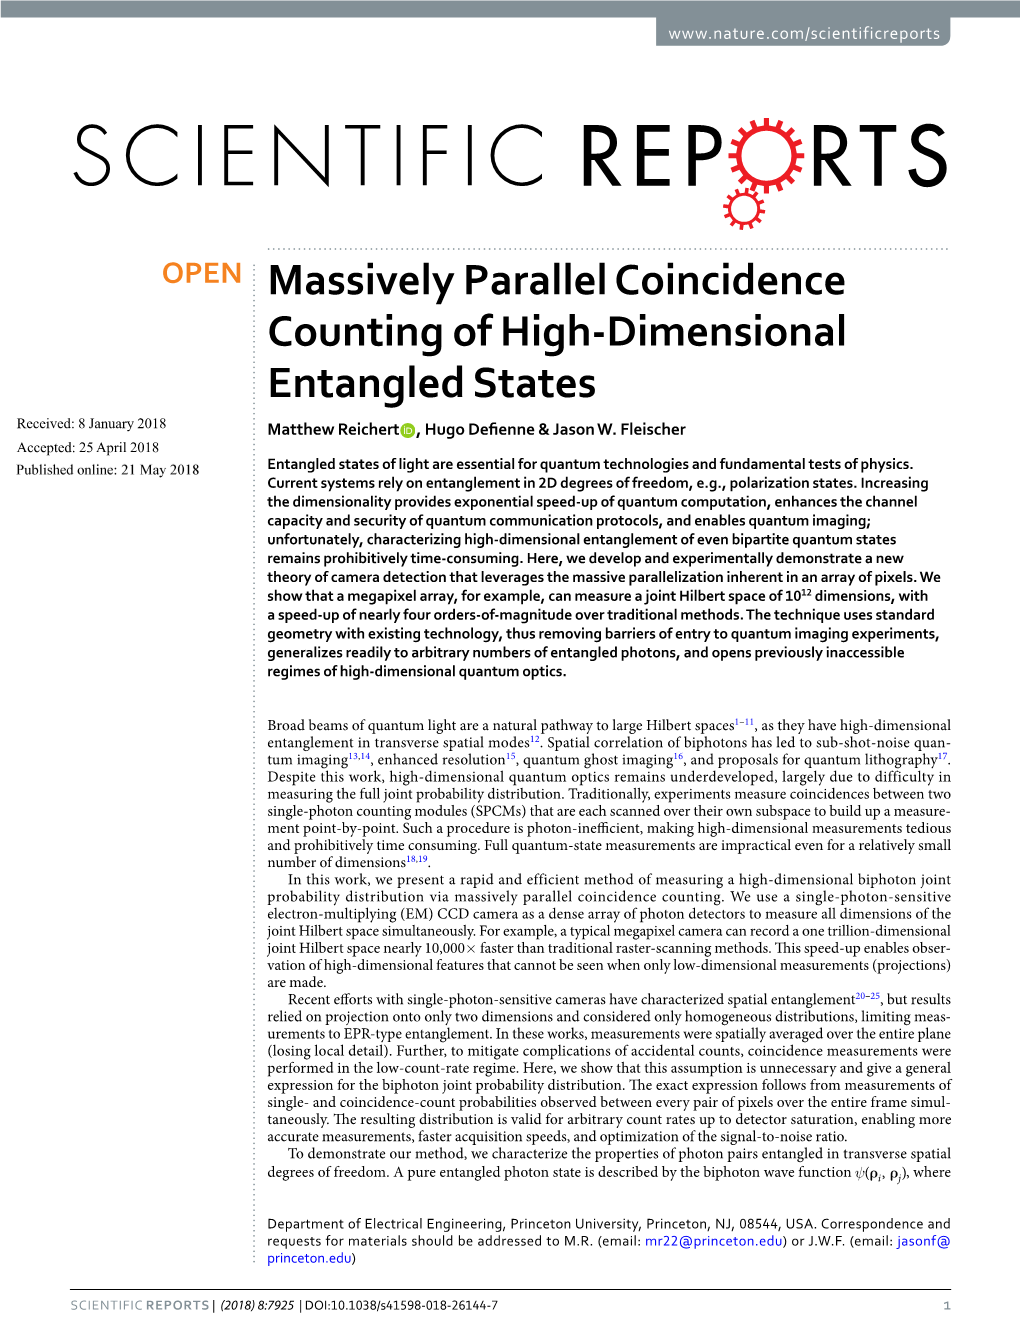 Massively Parallel Coincidence Counting of High-Dimensional Entangled States Received: 8 January 2018 Matthew Reichert , Hugo Defenne & Jason W